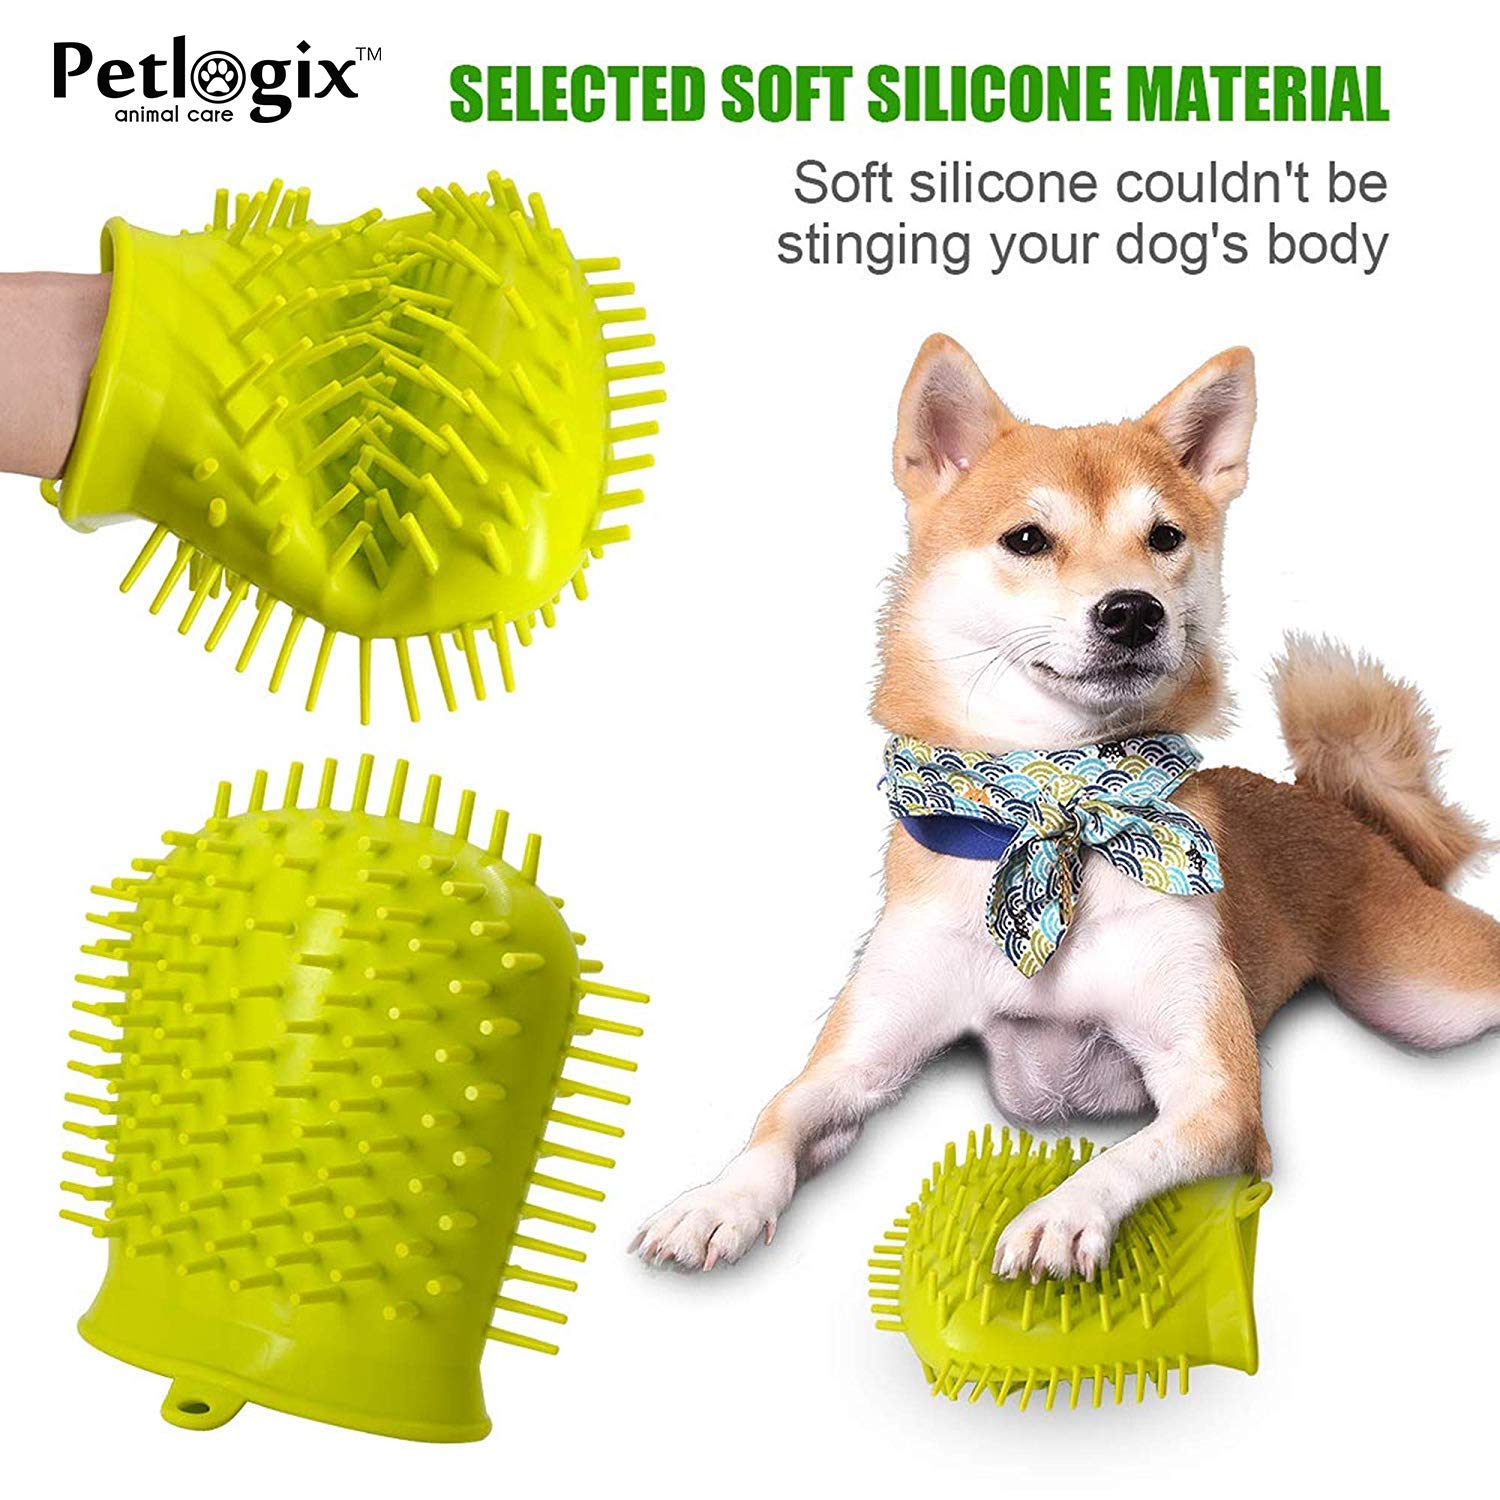 Petlogix 2-in-1 Portable Dog Paw Cleaner Cup Pet Foot Washer Scrubber with Silicone Massage Bristles Cleaning Brush for Pet Grooming (Large)